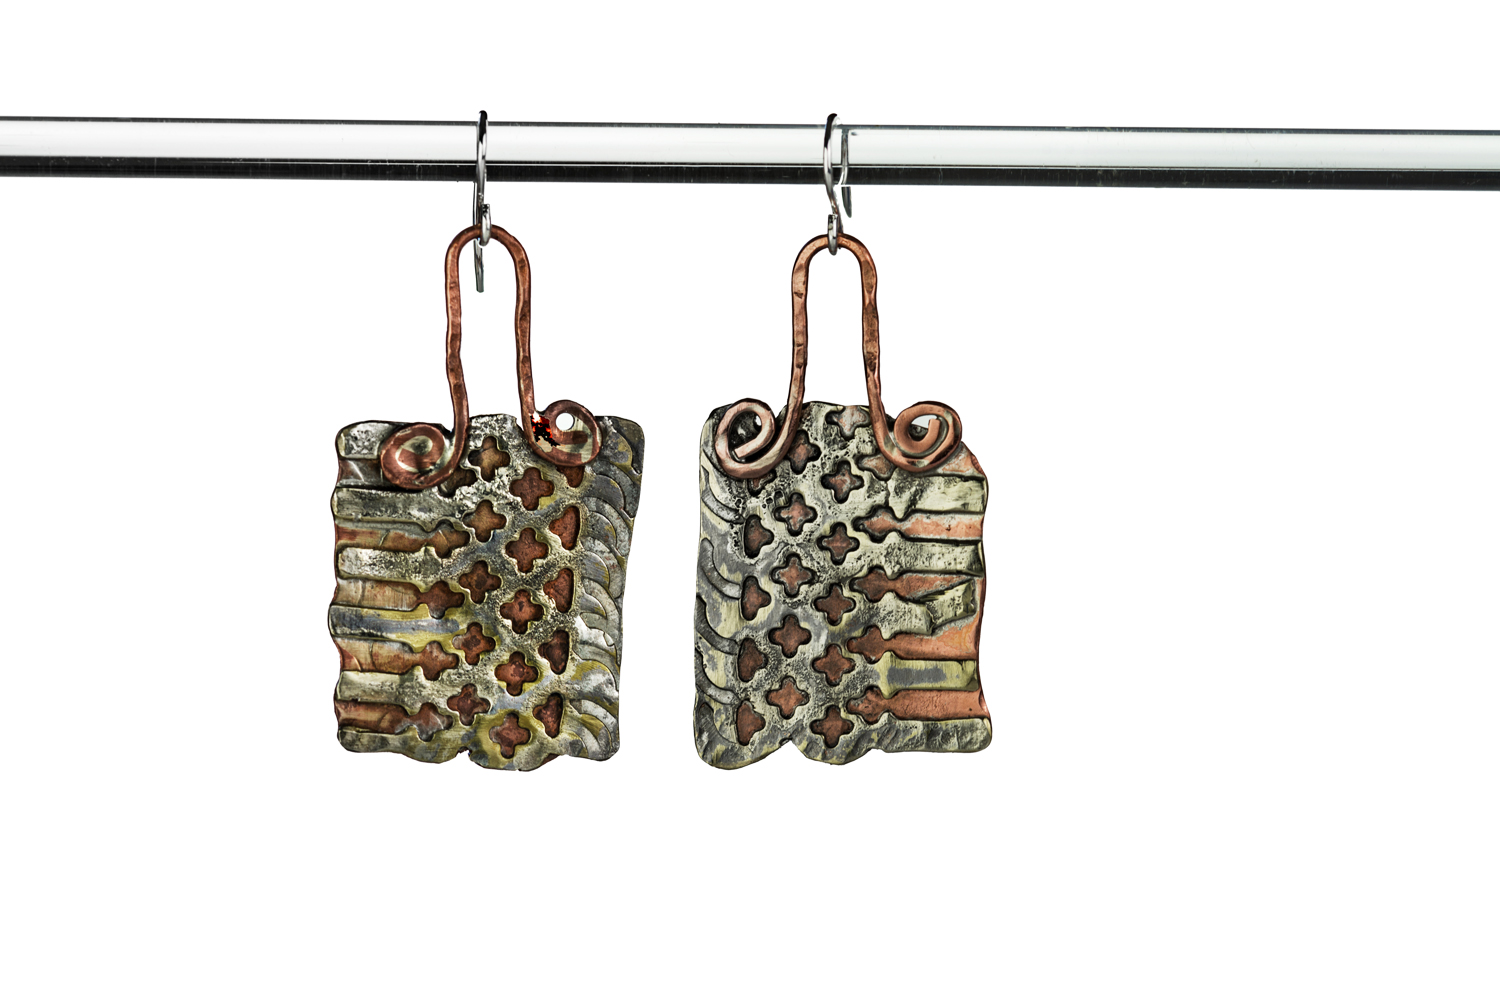 SILVER OVERLAY EARRINGS ~ Repurposed hand-forged vintage silver and copper earrings